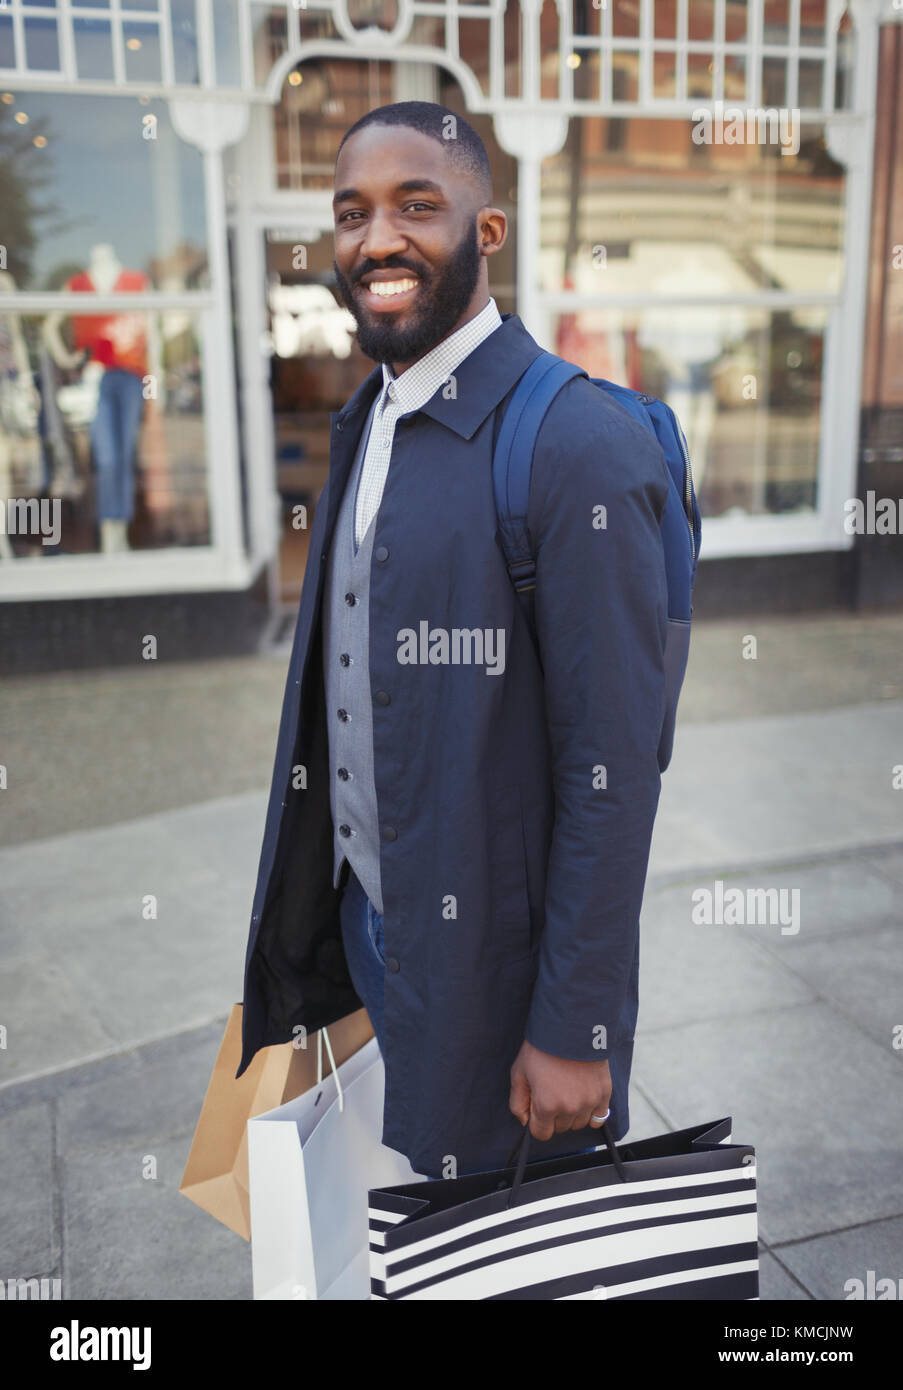 Portrait smiling, confident young man with shopping bags outside storefront Stock Photo